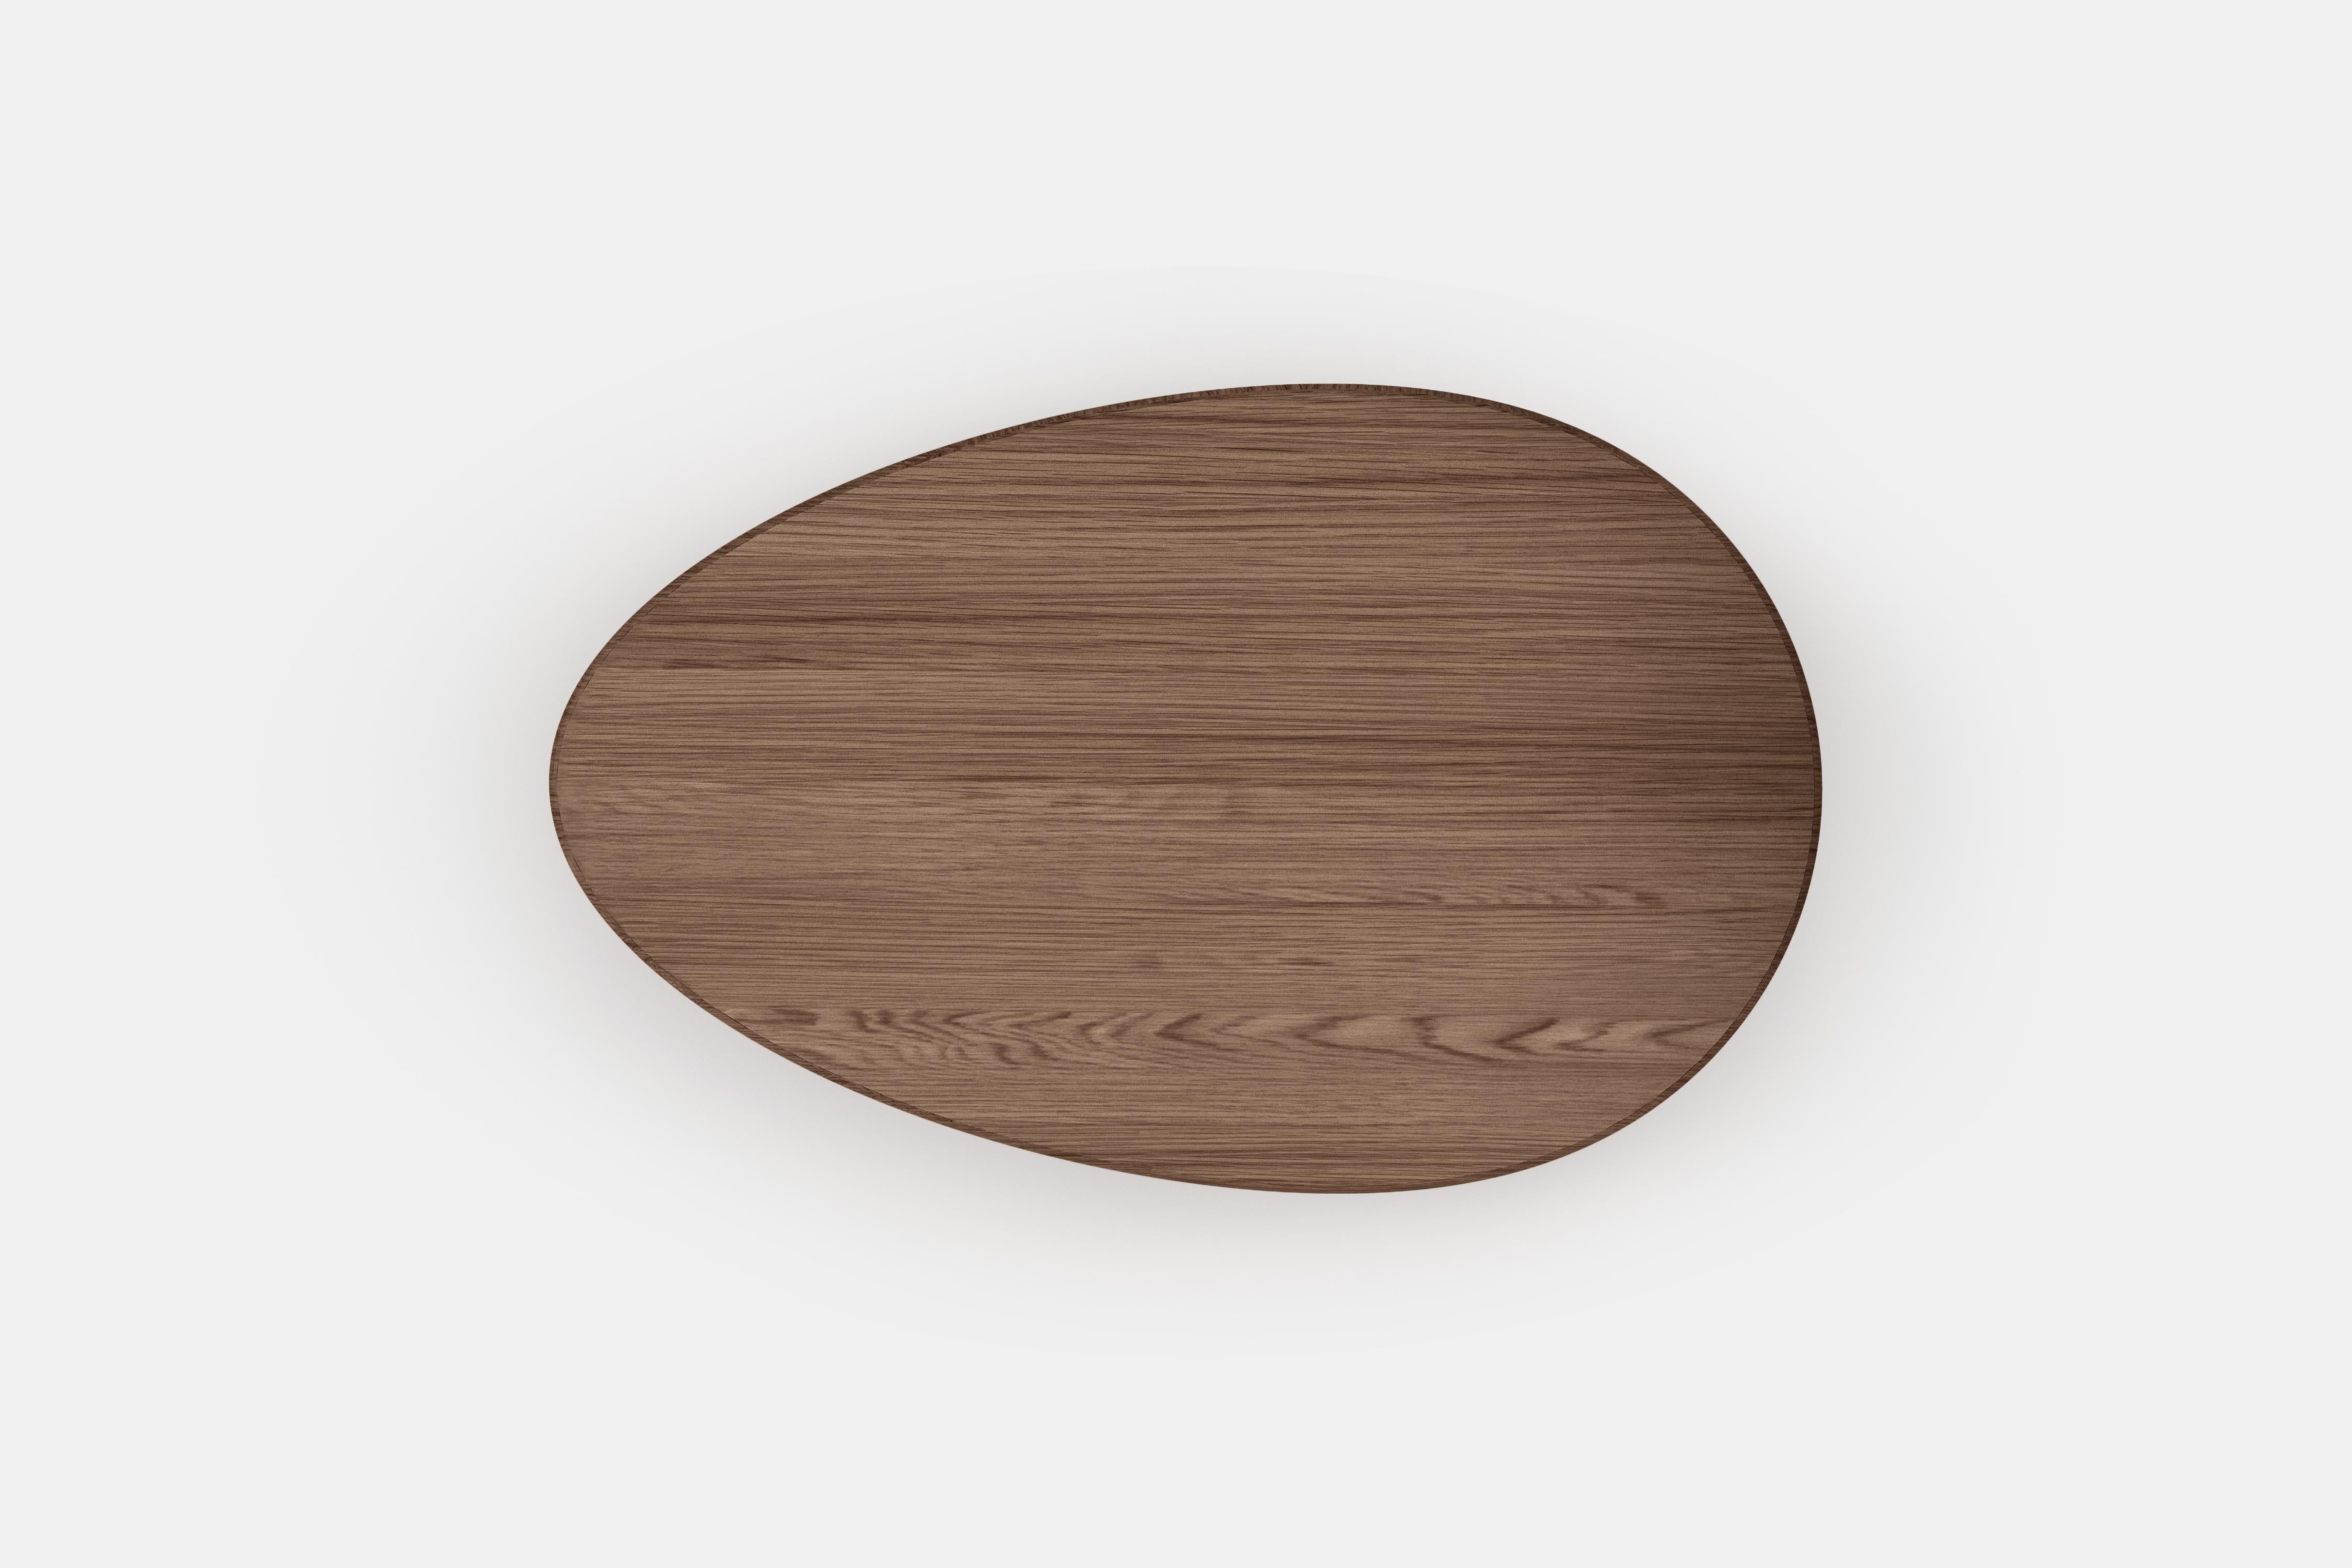 Organique Noviembre x Big Coffee Table in Walnut Wood Inspired by Brancusi, Table basse